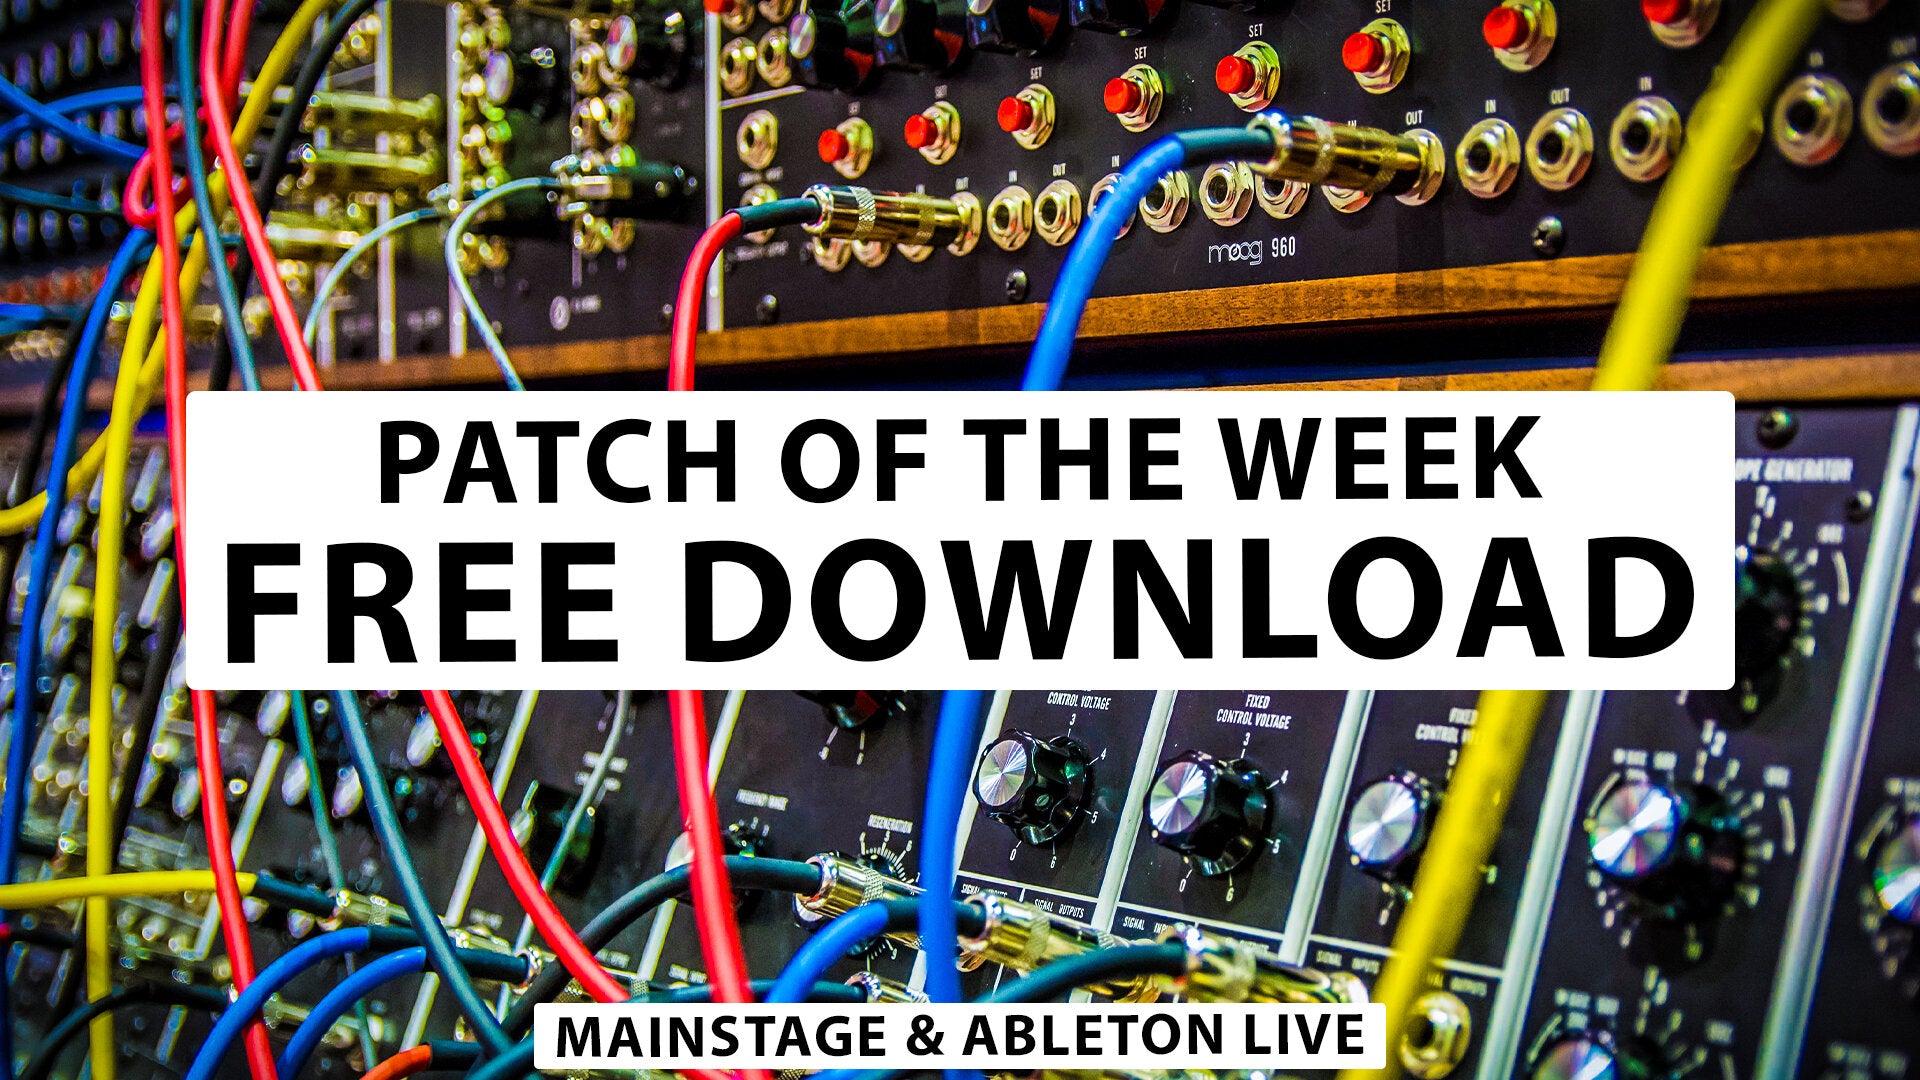 Incredible Synth - Free MainStage & Ableton Worship Patch!